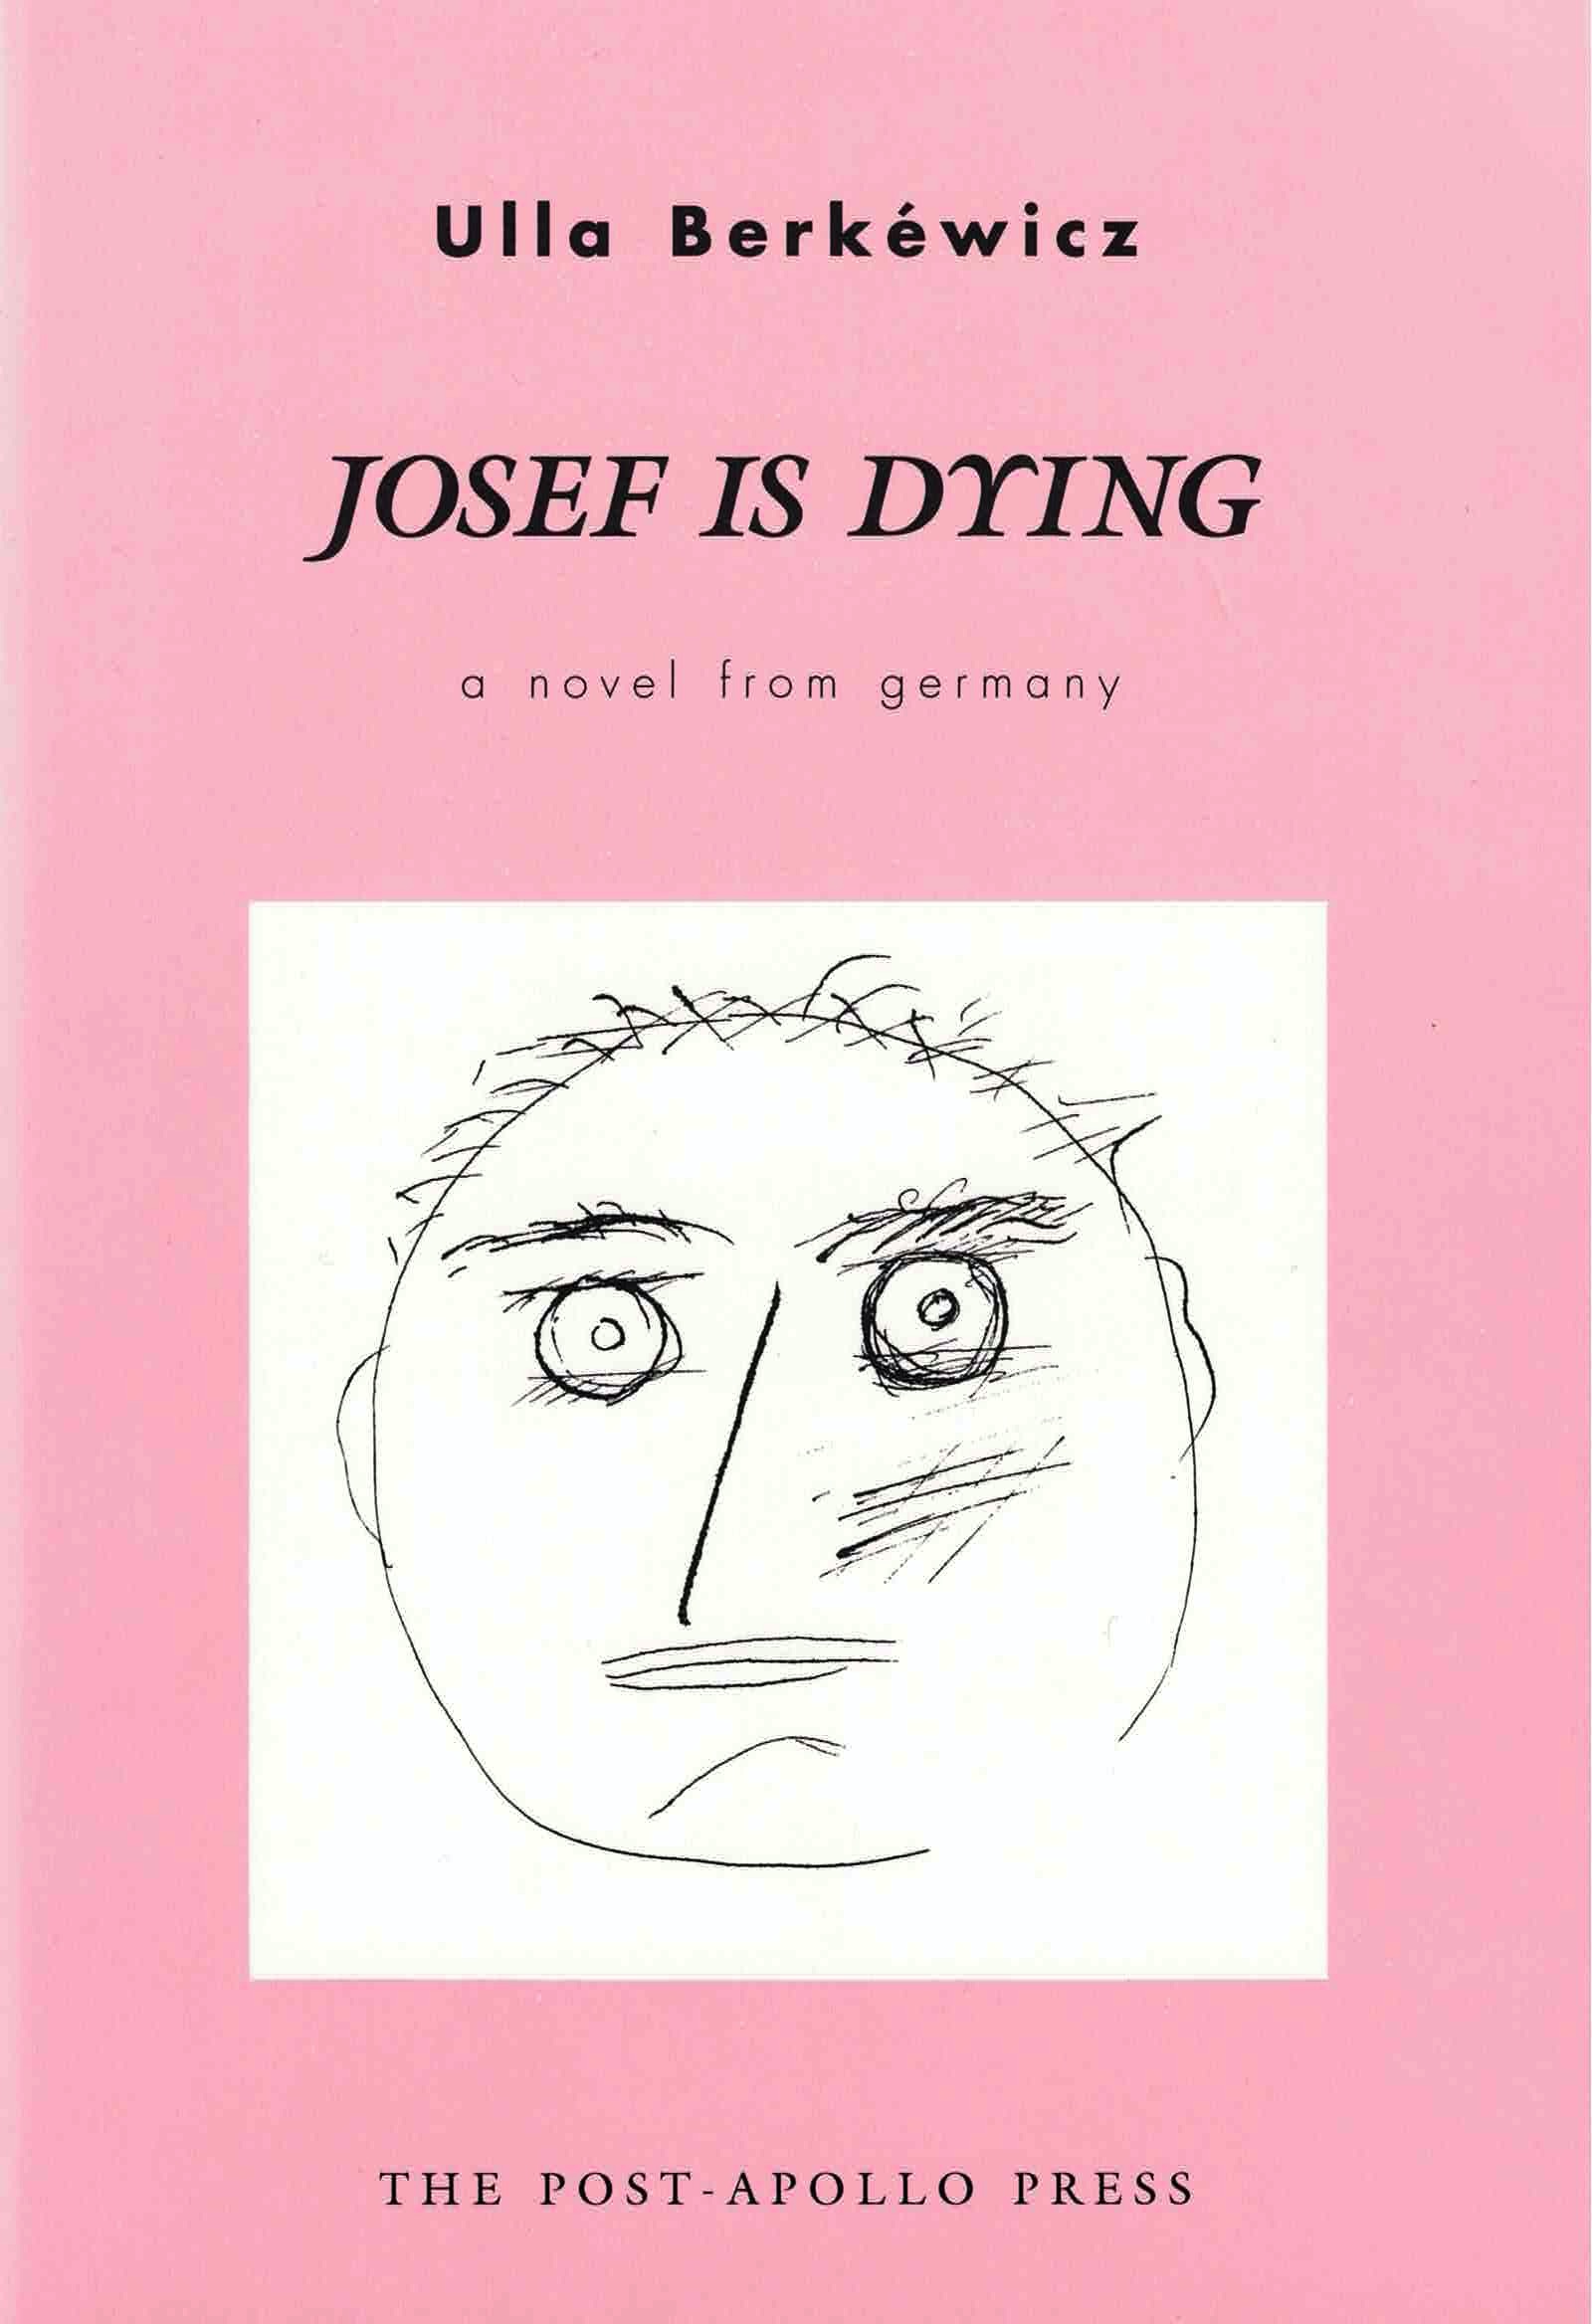 cover of Josef is Dying by Ulla Berkéwicz, light pink background with white square and hand-drawn simple sketch of face